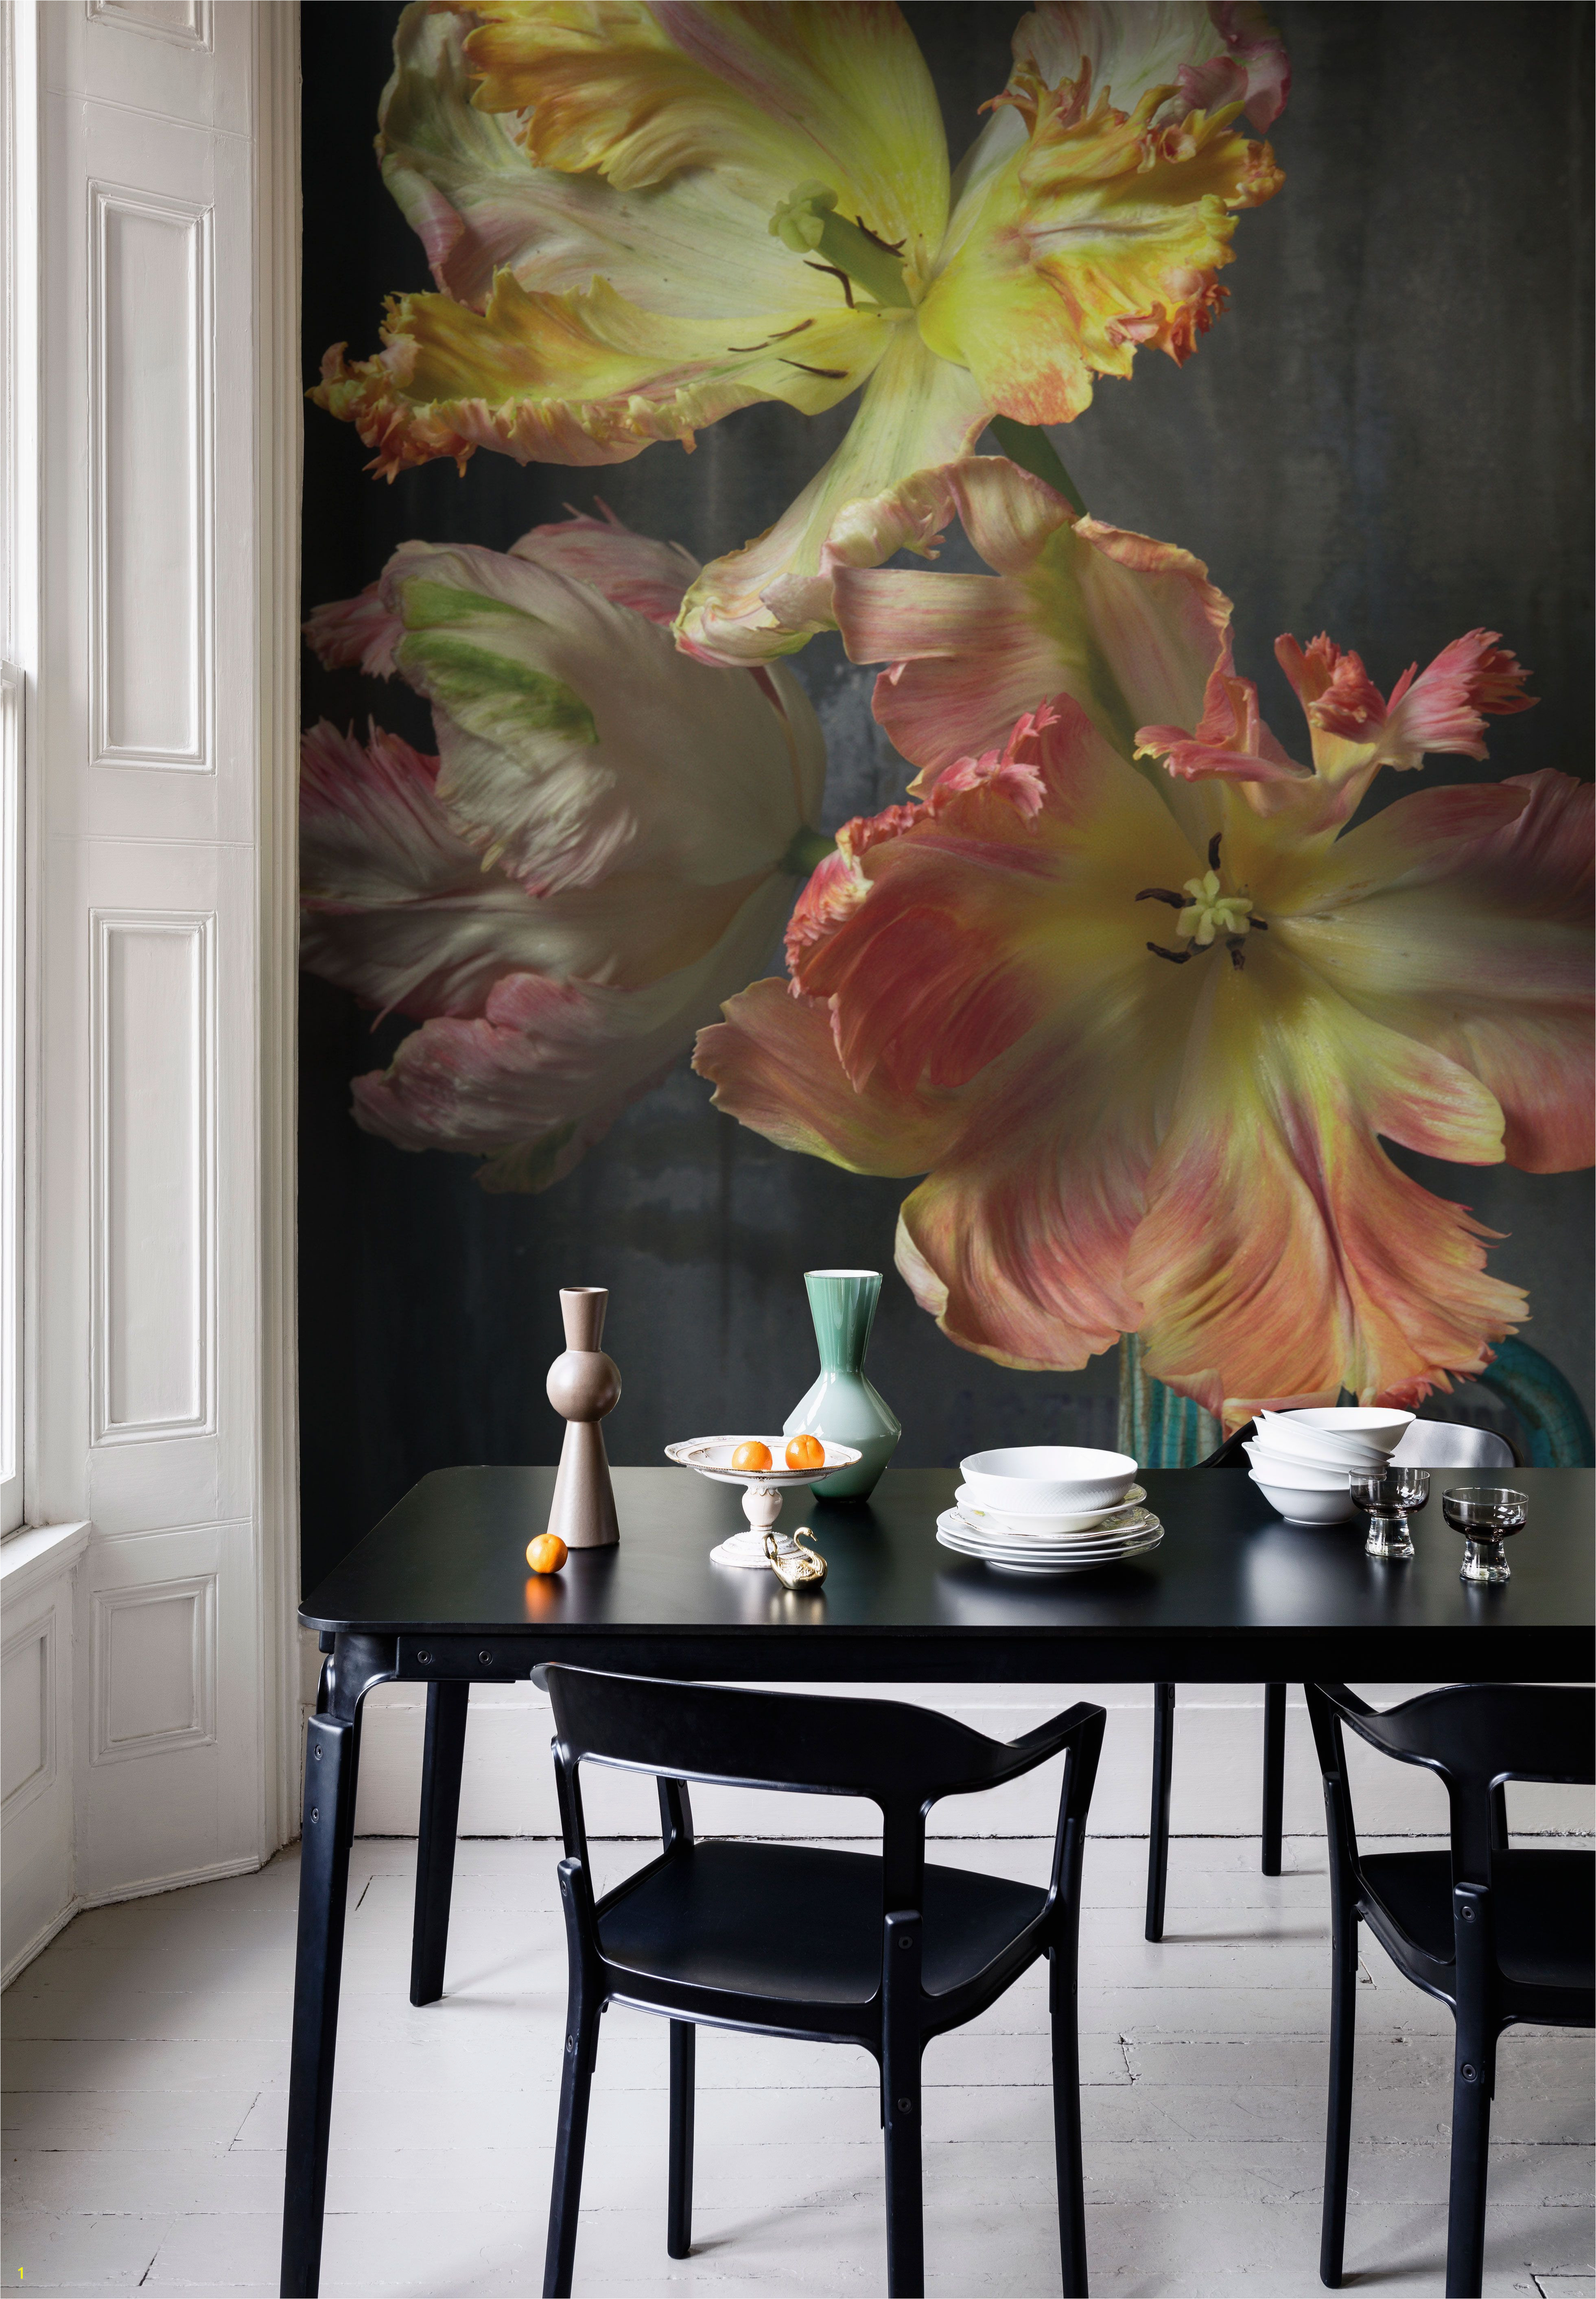 Bursting Flower Still Mural Trunk Archive Collection from £65 per sq m